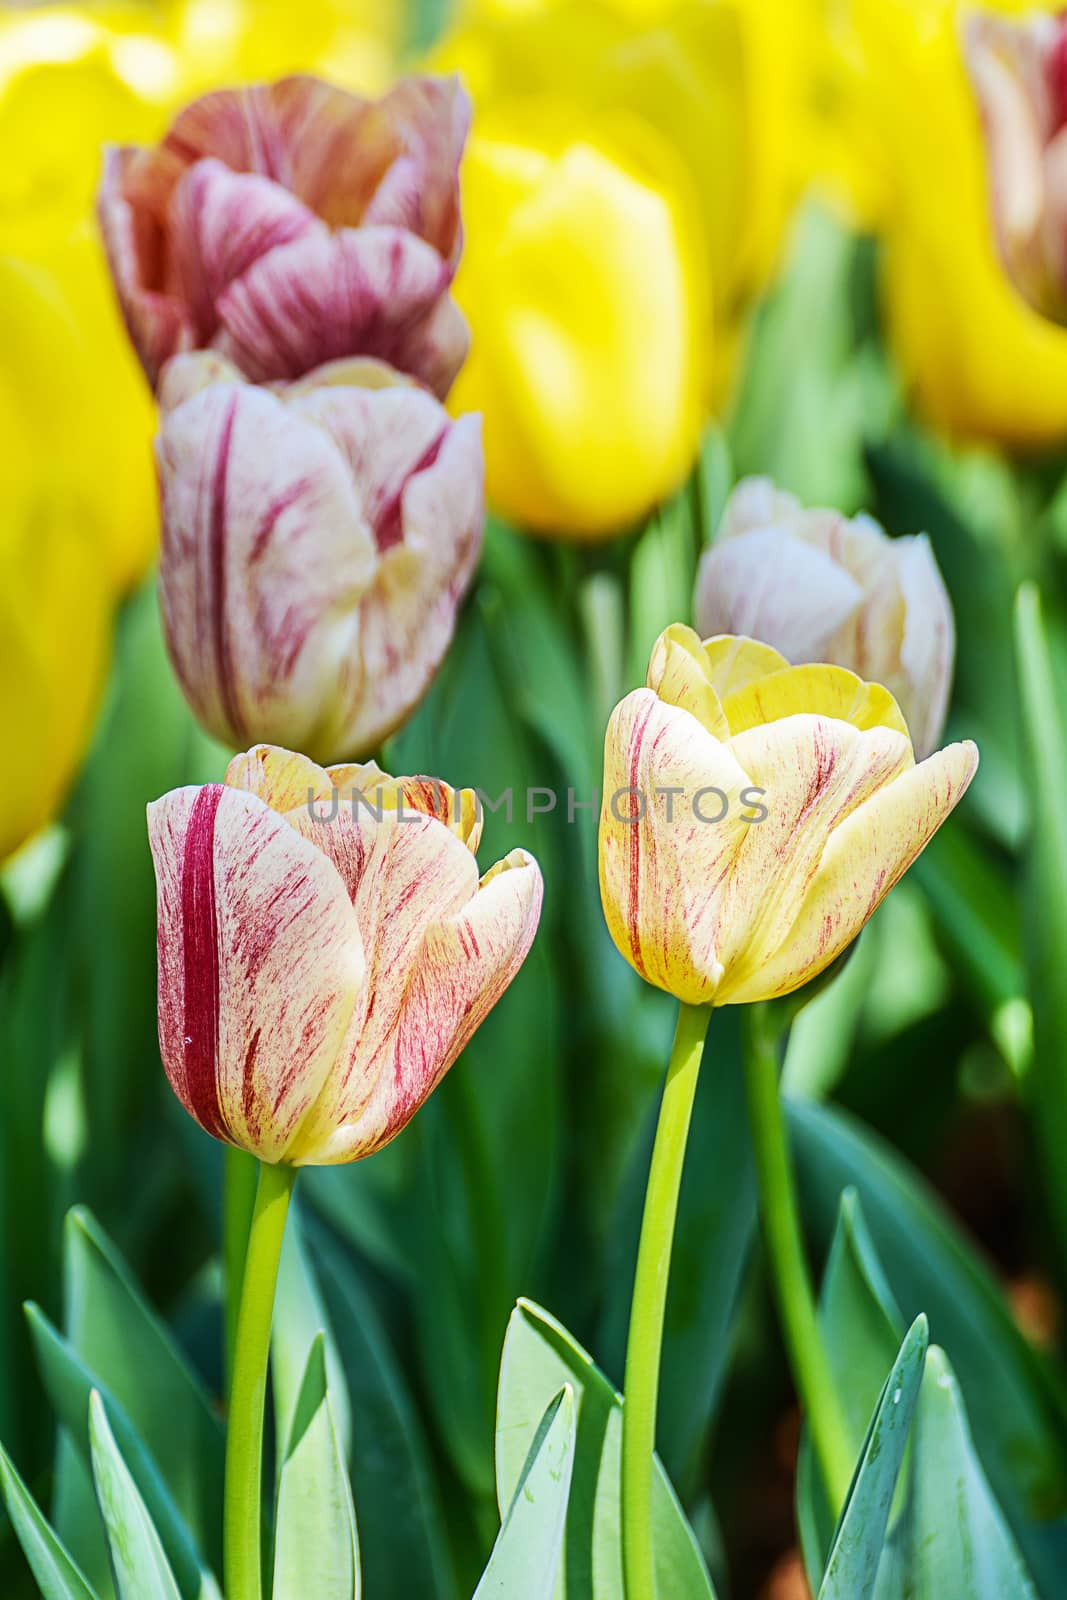 Tulips by NuwatPhoto